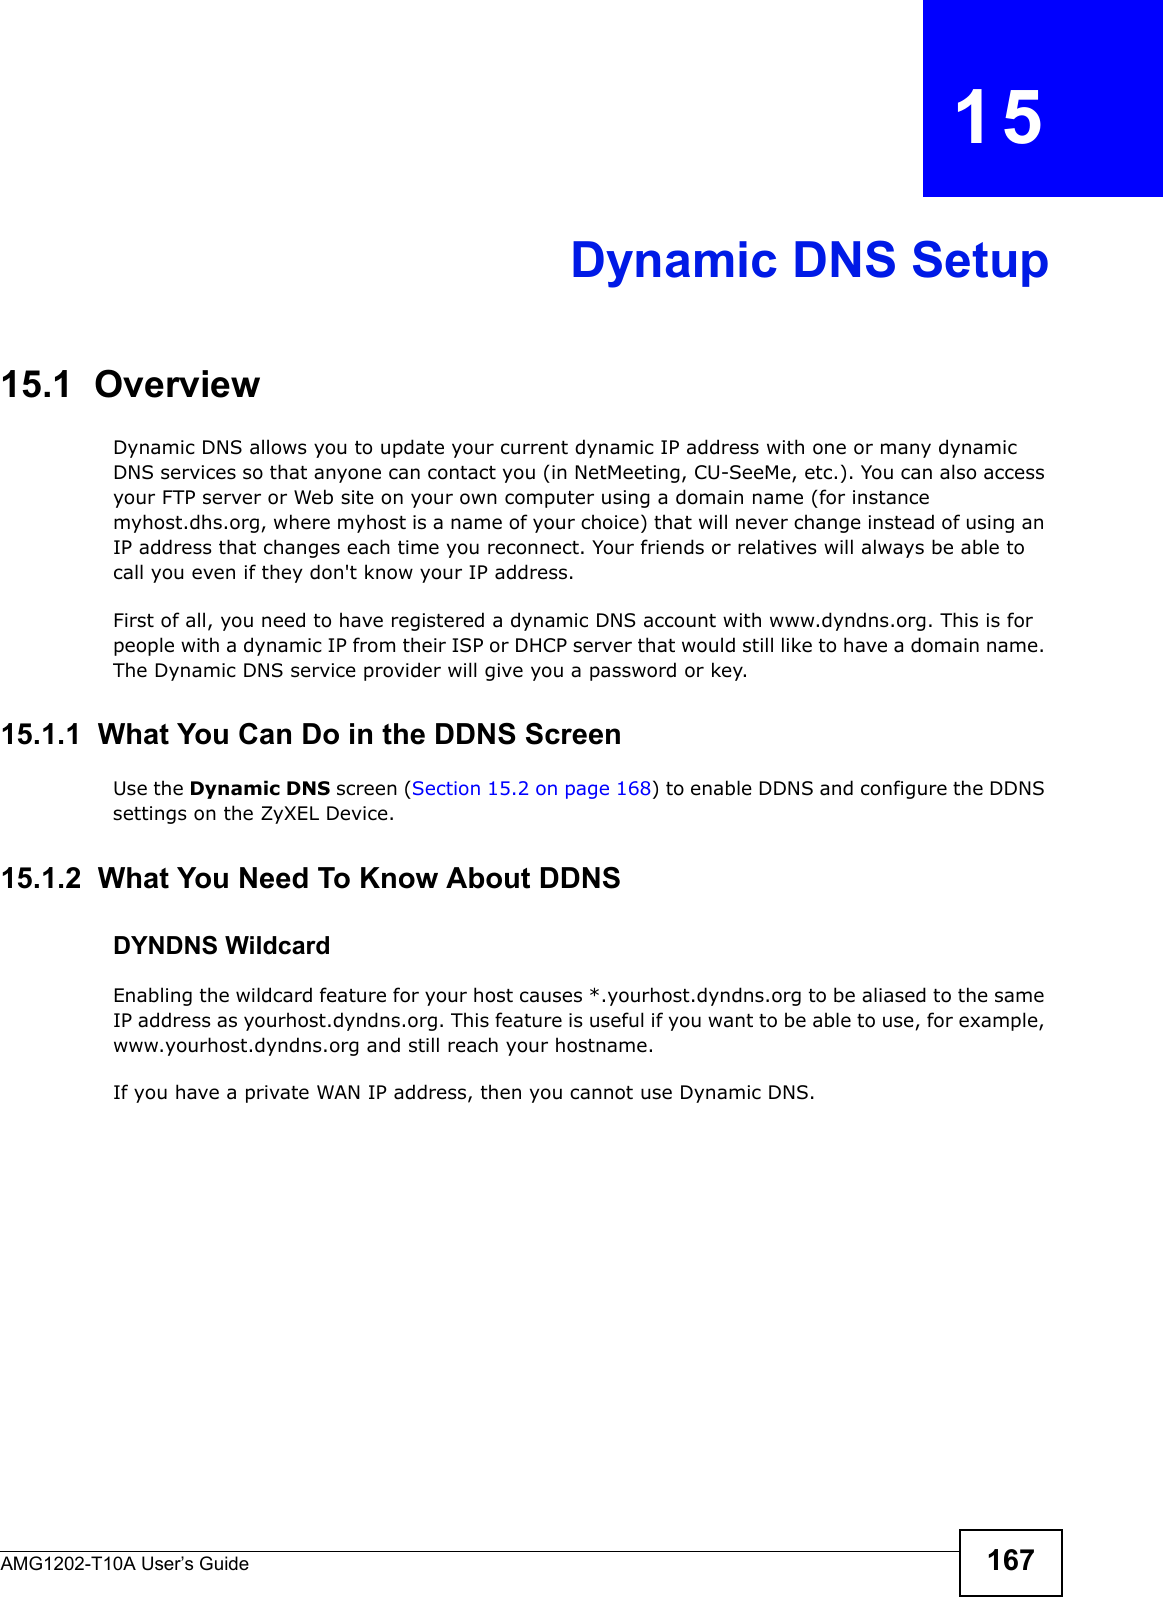 AMG1202-T10A User’s Guide 167CHAPTER   15Dynamic DNS Setup15.1  Overview Dynamic DNS allows you to update your current dynamic IP address with one or many dynamic DNS services so that anyone can contact you (in NetMeeting, CU-SeeMe, etc.). You can also access your FTP server or Web site on your own computer using a domain name (for instance myhost.dhs.org, where myhost is a name of your choice) that will never change instead of using an IP address that changes each time you reconnect. Your friends or relatives will always be able to call you even if they don&apos;t know your IP address.First of all, you need to have registered a dynamic DNS account with www.dyndns.org. This is for people with a dynamic IP from their ISP or DHCP server that would still like to have a domain name. The Dynamic DNS service provider will give you a password or key. 15.1.1  What You Can Do in the DDNS ScreenUse the Dynamic DNS screen (Section 15.2 on page 168) to enable DDNS and configure the DDNS settings on the ZyXEL Device.15.1.2  What You Need To Know About DDNSDYNDNS WildcardEnabling the wildcard feature for your host causes *.yourhost.dyndns.org to be aliased to the same IP address as yourhost.dyndns.org. This feature is useful if you want to be able to use, for example, www.yourhost.dyndns.org and still reach your hostname.If you have a private WAN IP address, then you cannot use Dynamic DNS.